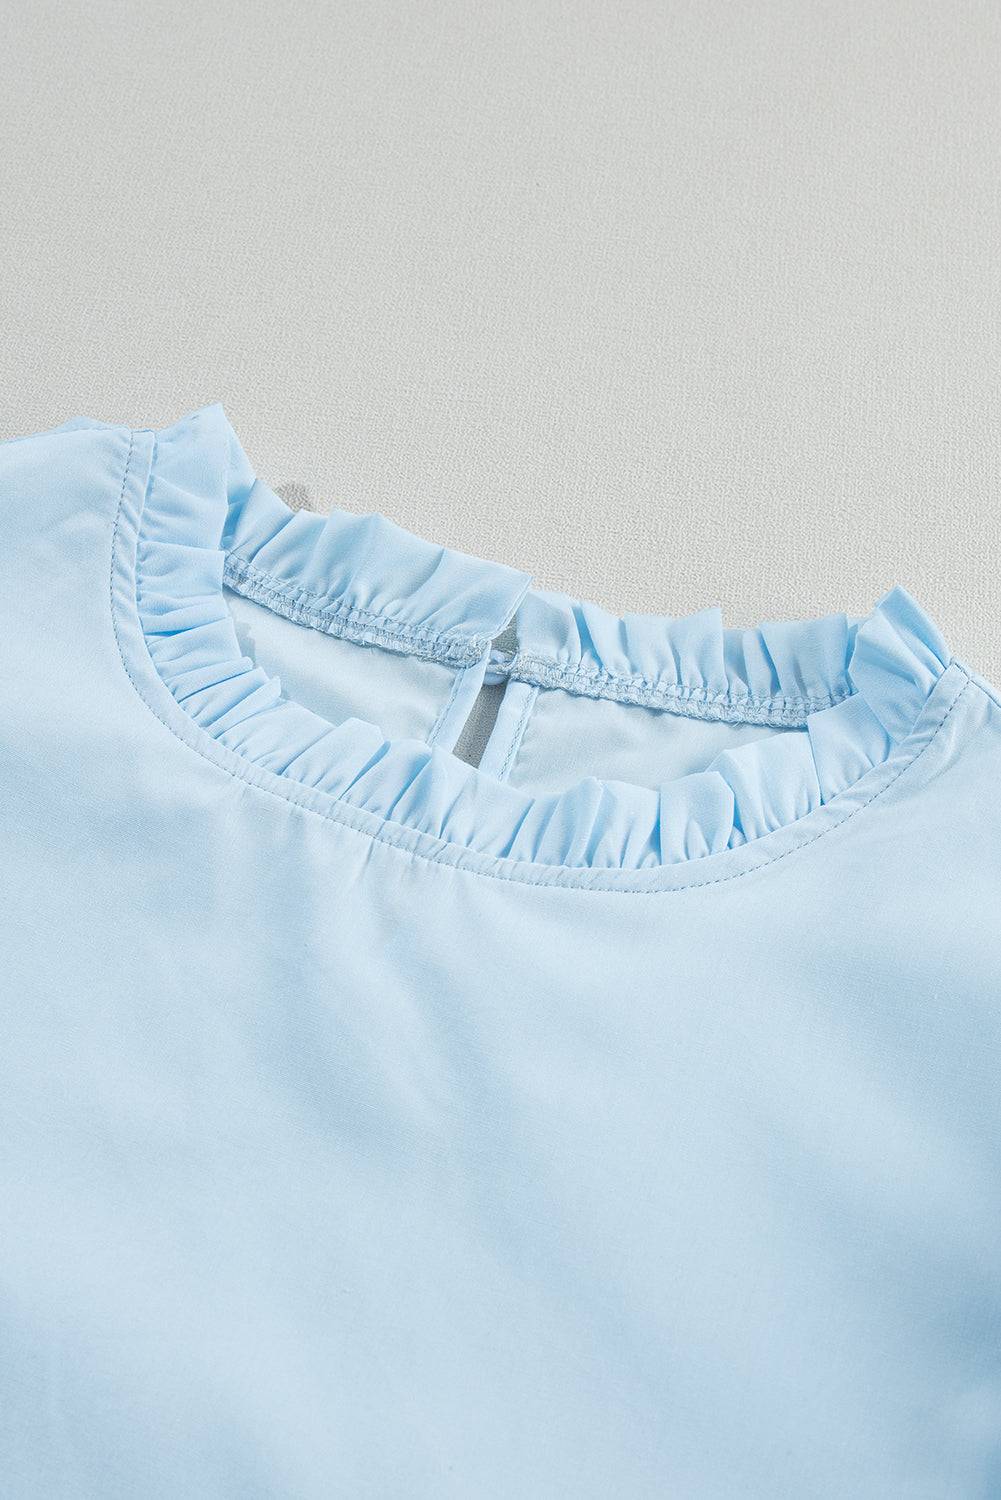 a close up of a blue shirt on a white surface